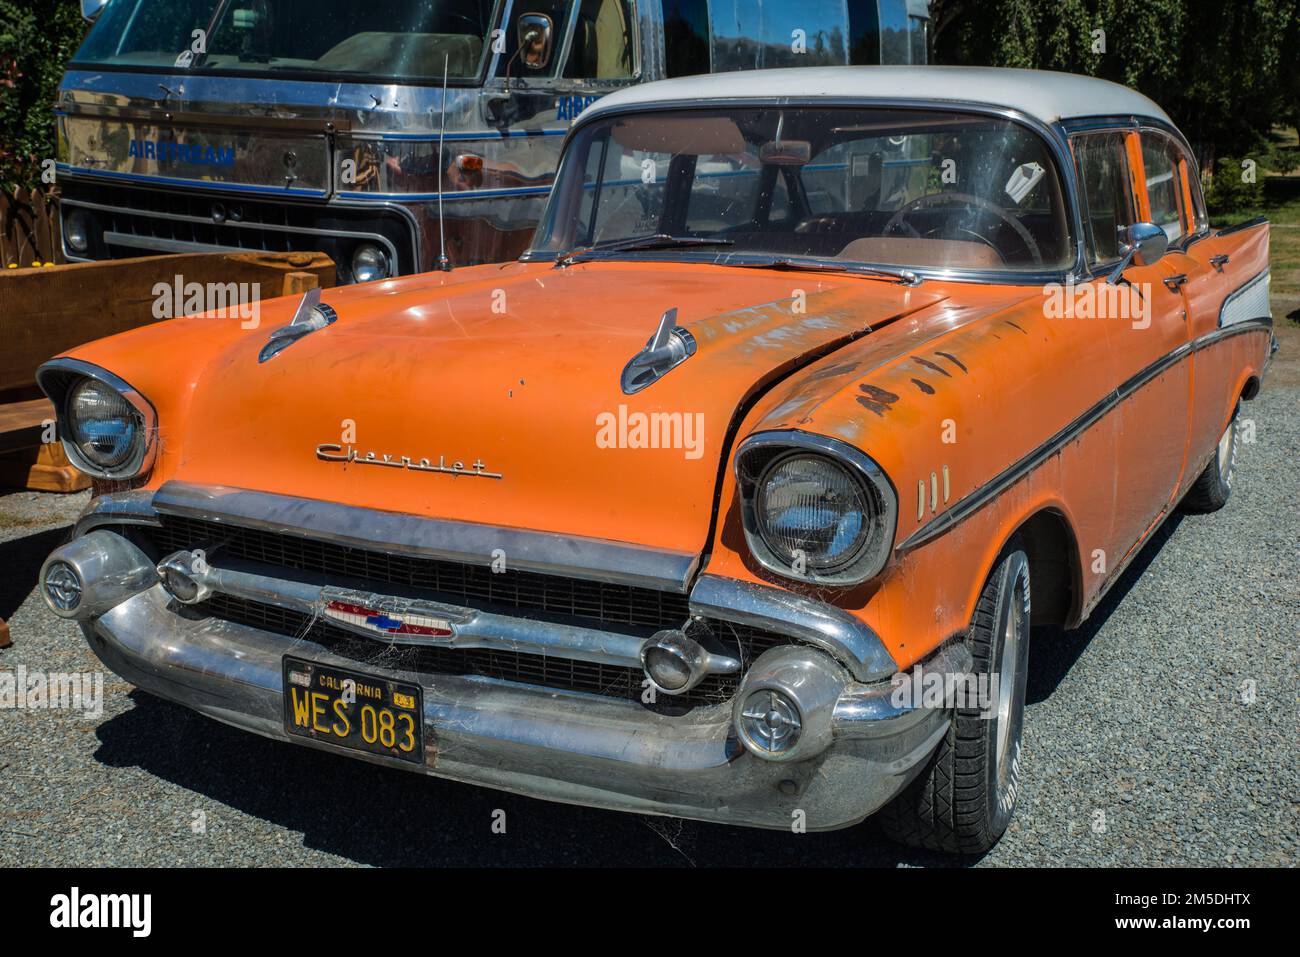 A rusting 1956 Chevrolet Bel Air in orange, complete with cobwebs Stock Photo